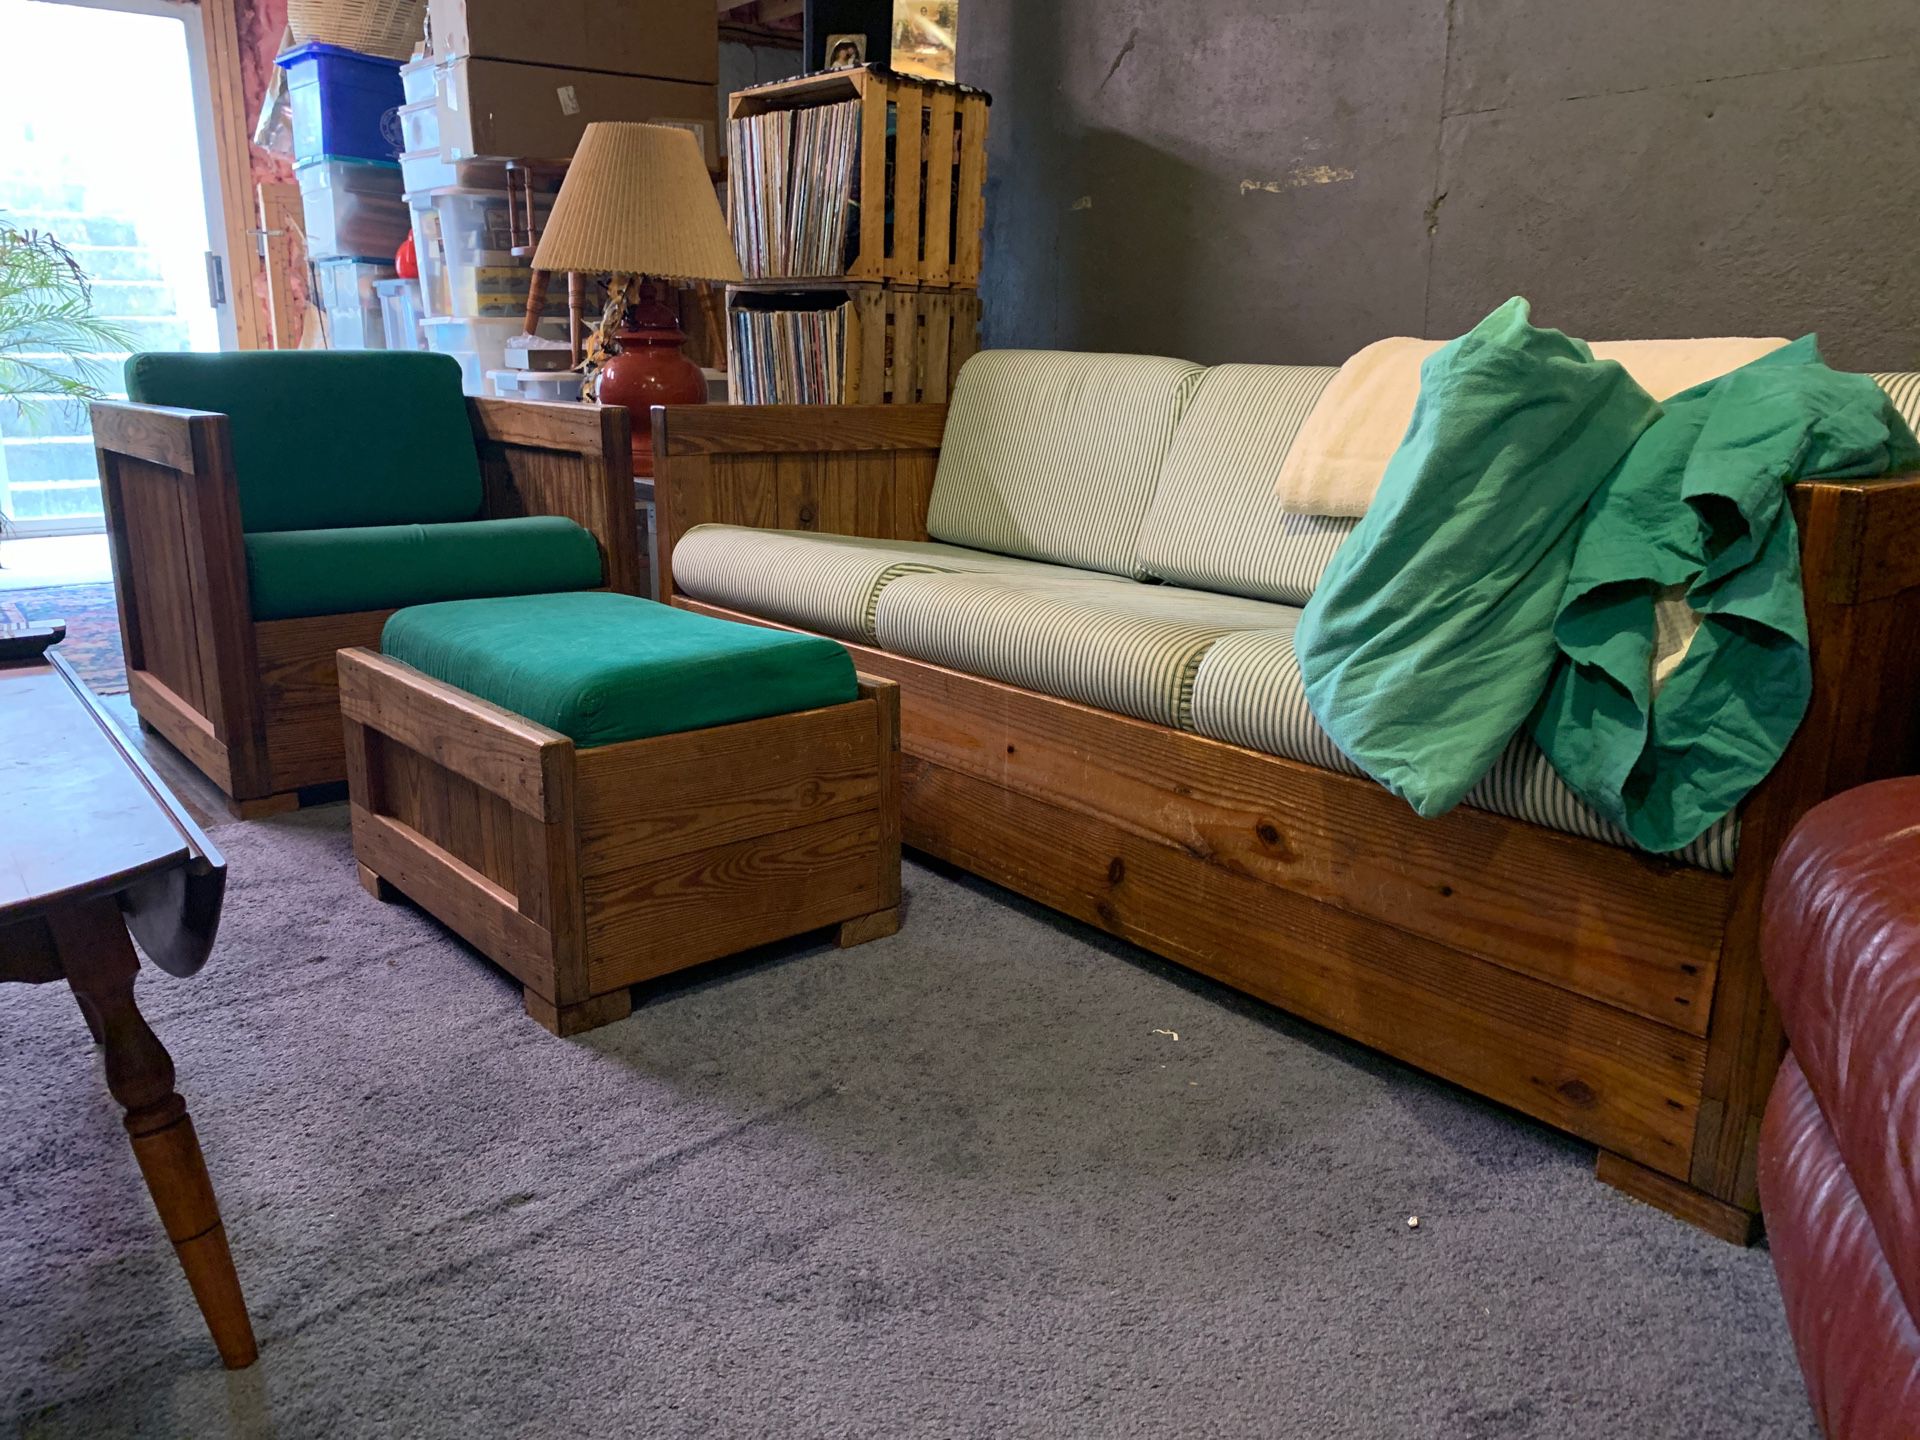 THIS END UP FURNITURE: Couch (green ticking fabric) 6 1/2 feet long ; 2 Chairs (solid green material); 2 End Tables; 1 Ottoman. $225